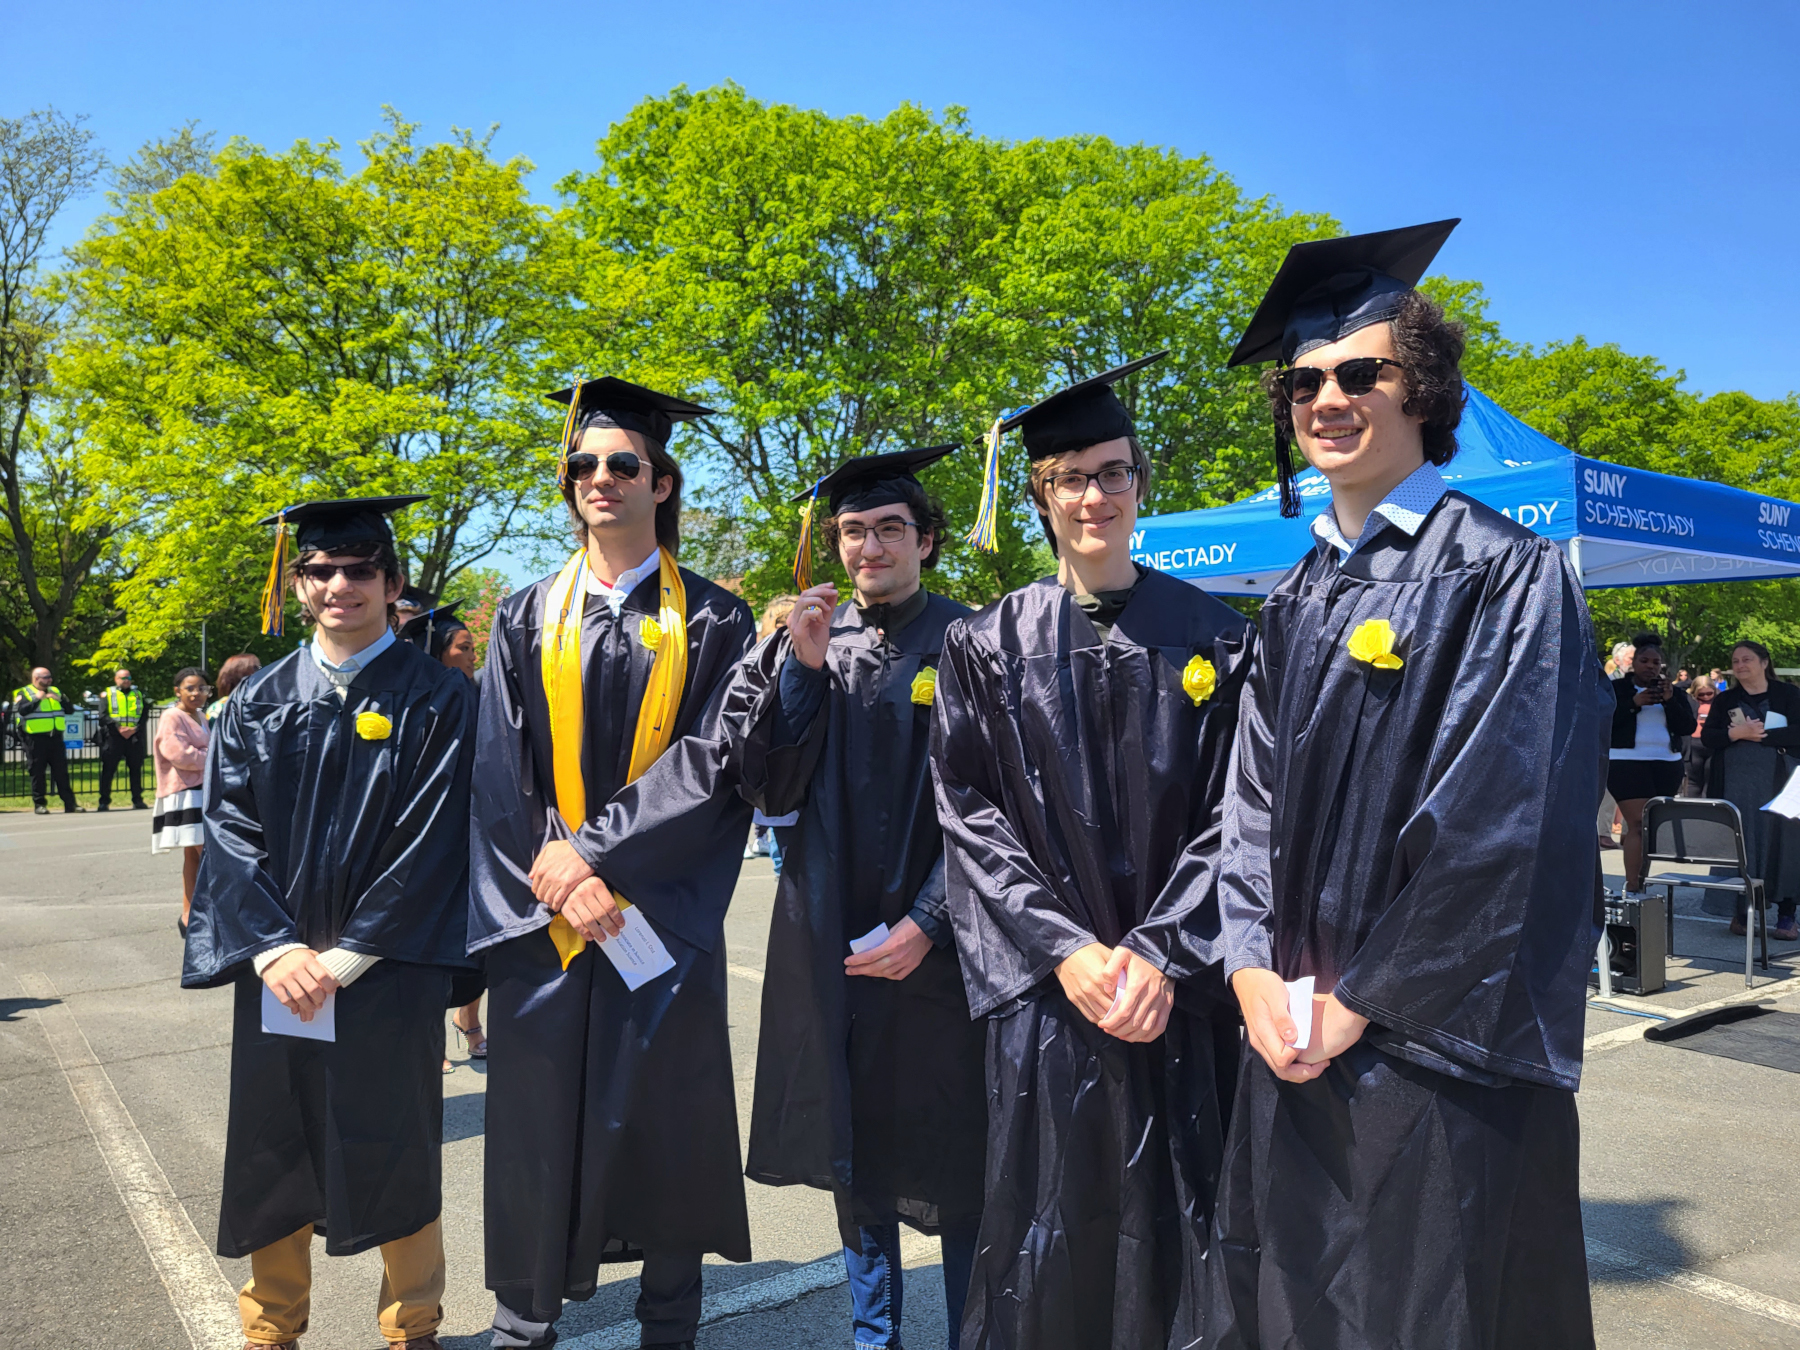 Five graduates in line, smiling, waiting to cross the stage